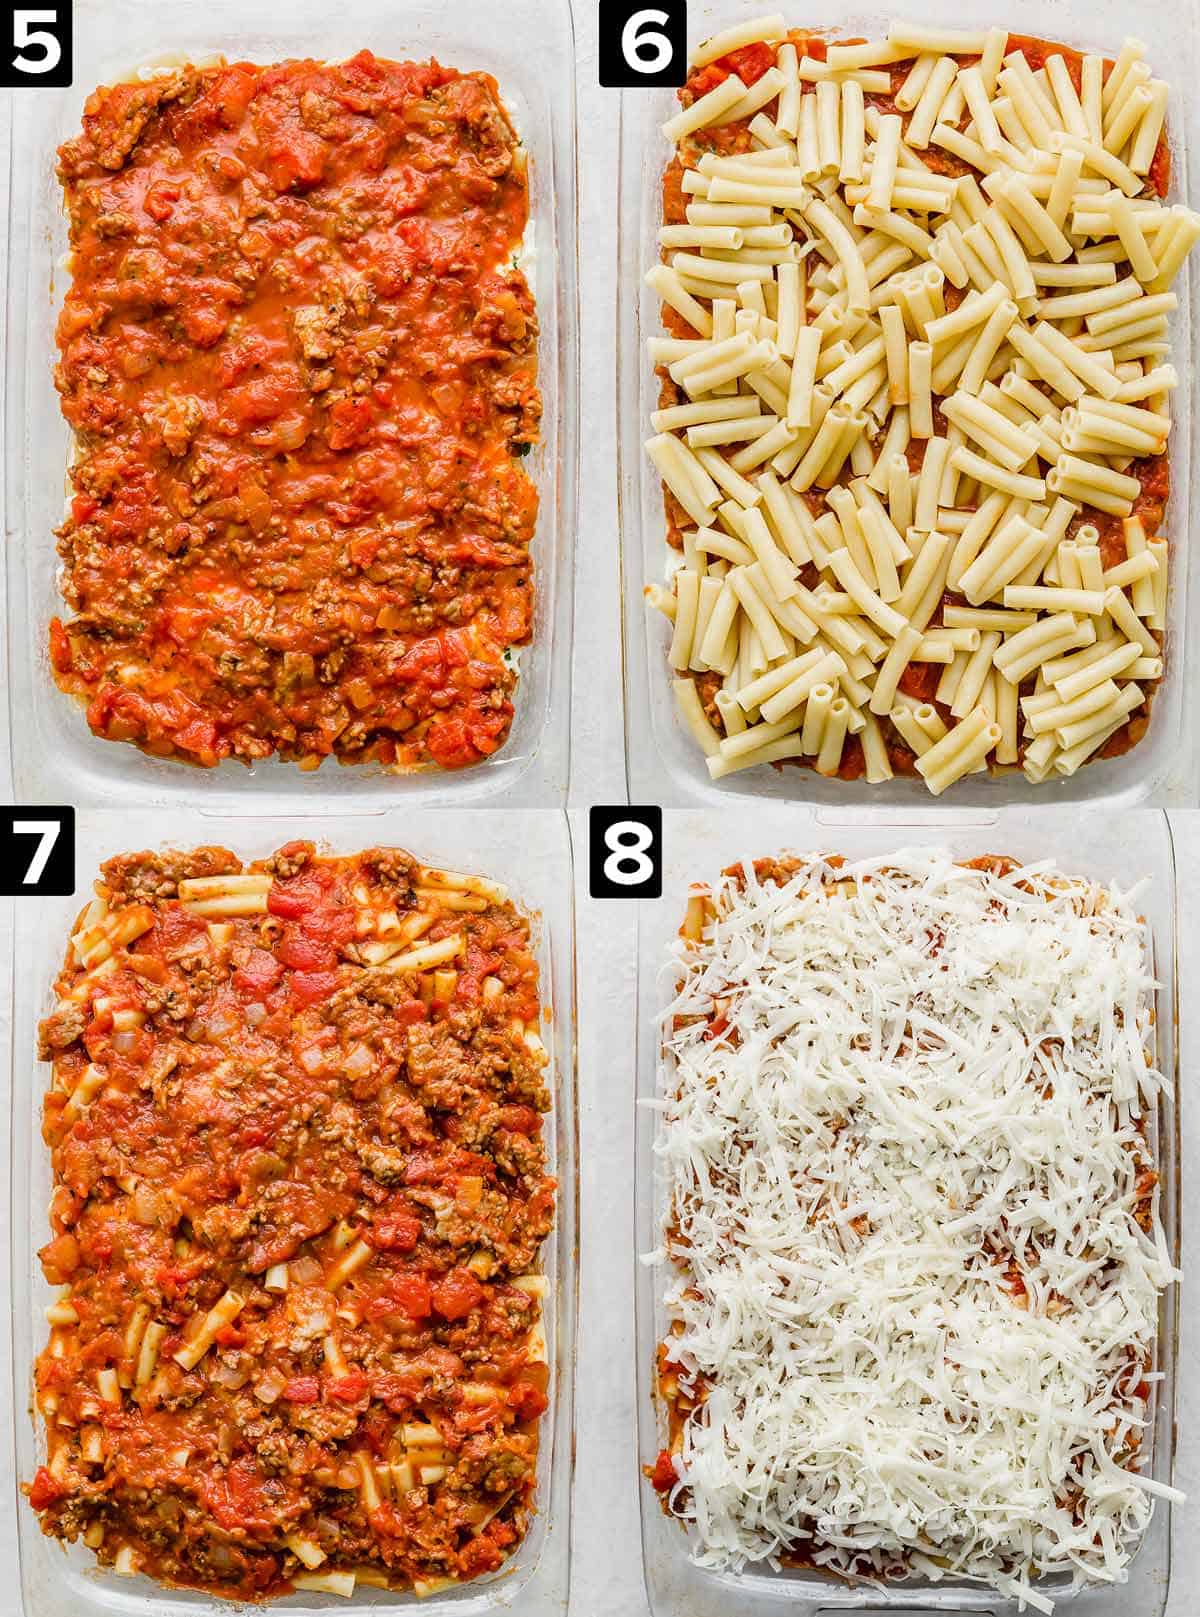 Four images showing the layering of a baked ziti noodle recipe.